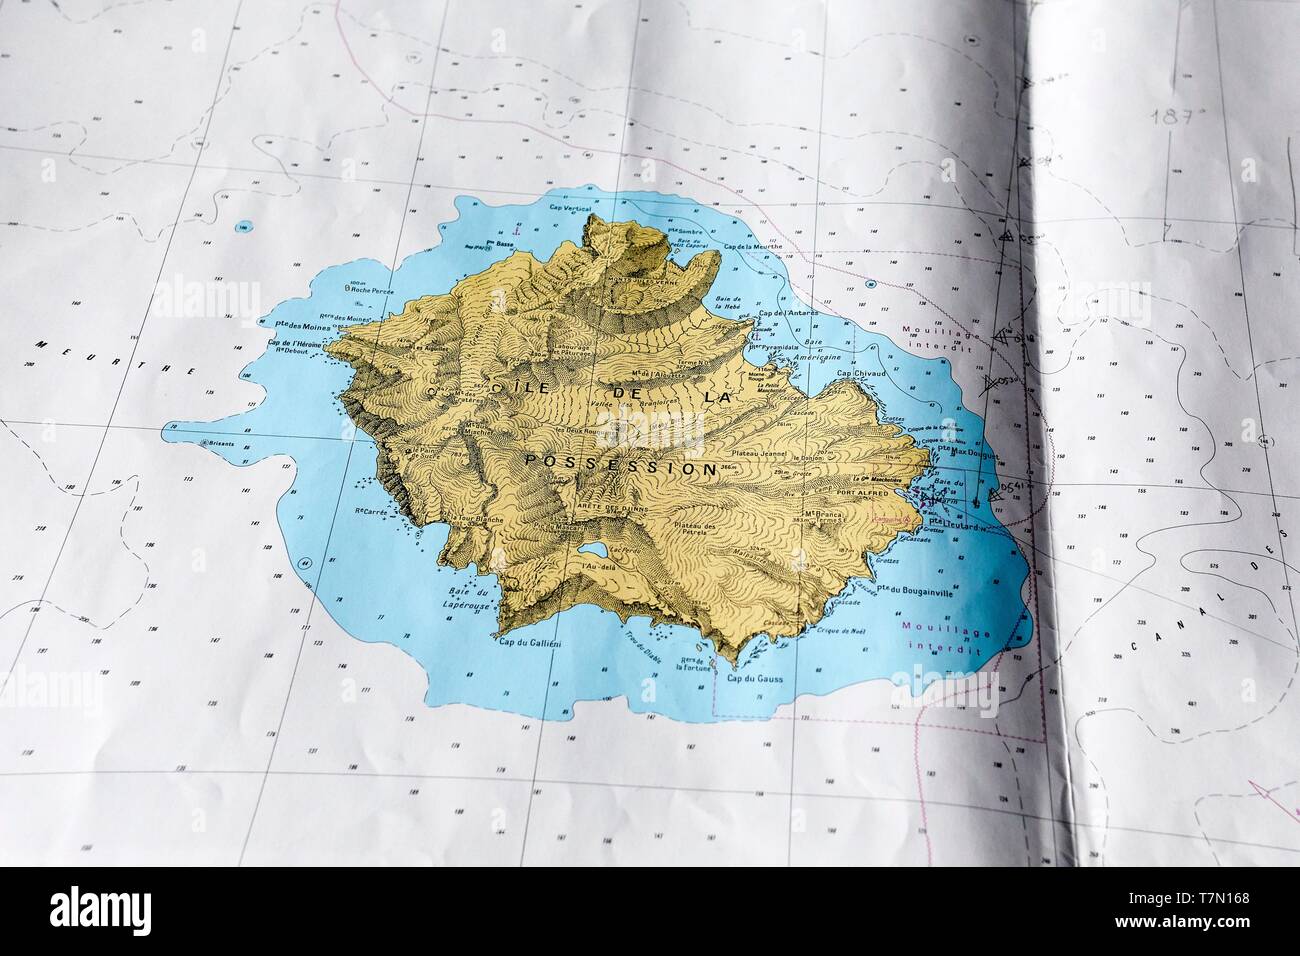 France, French Southern and Antarctic Lands, Crozet Islands, Ile de la Possession (Possession Island), Sea chart of the island aboard the Marion Dufresne (supply ship of French Southern and Antarctic Territories) Stock Photo